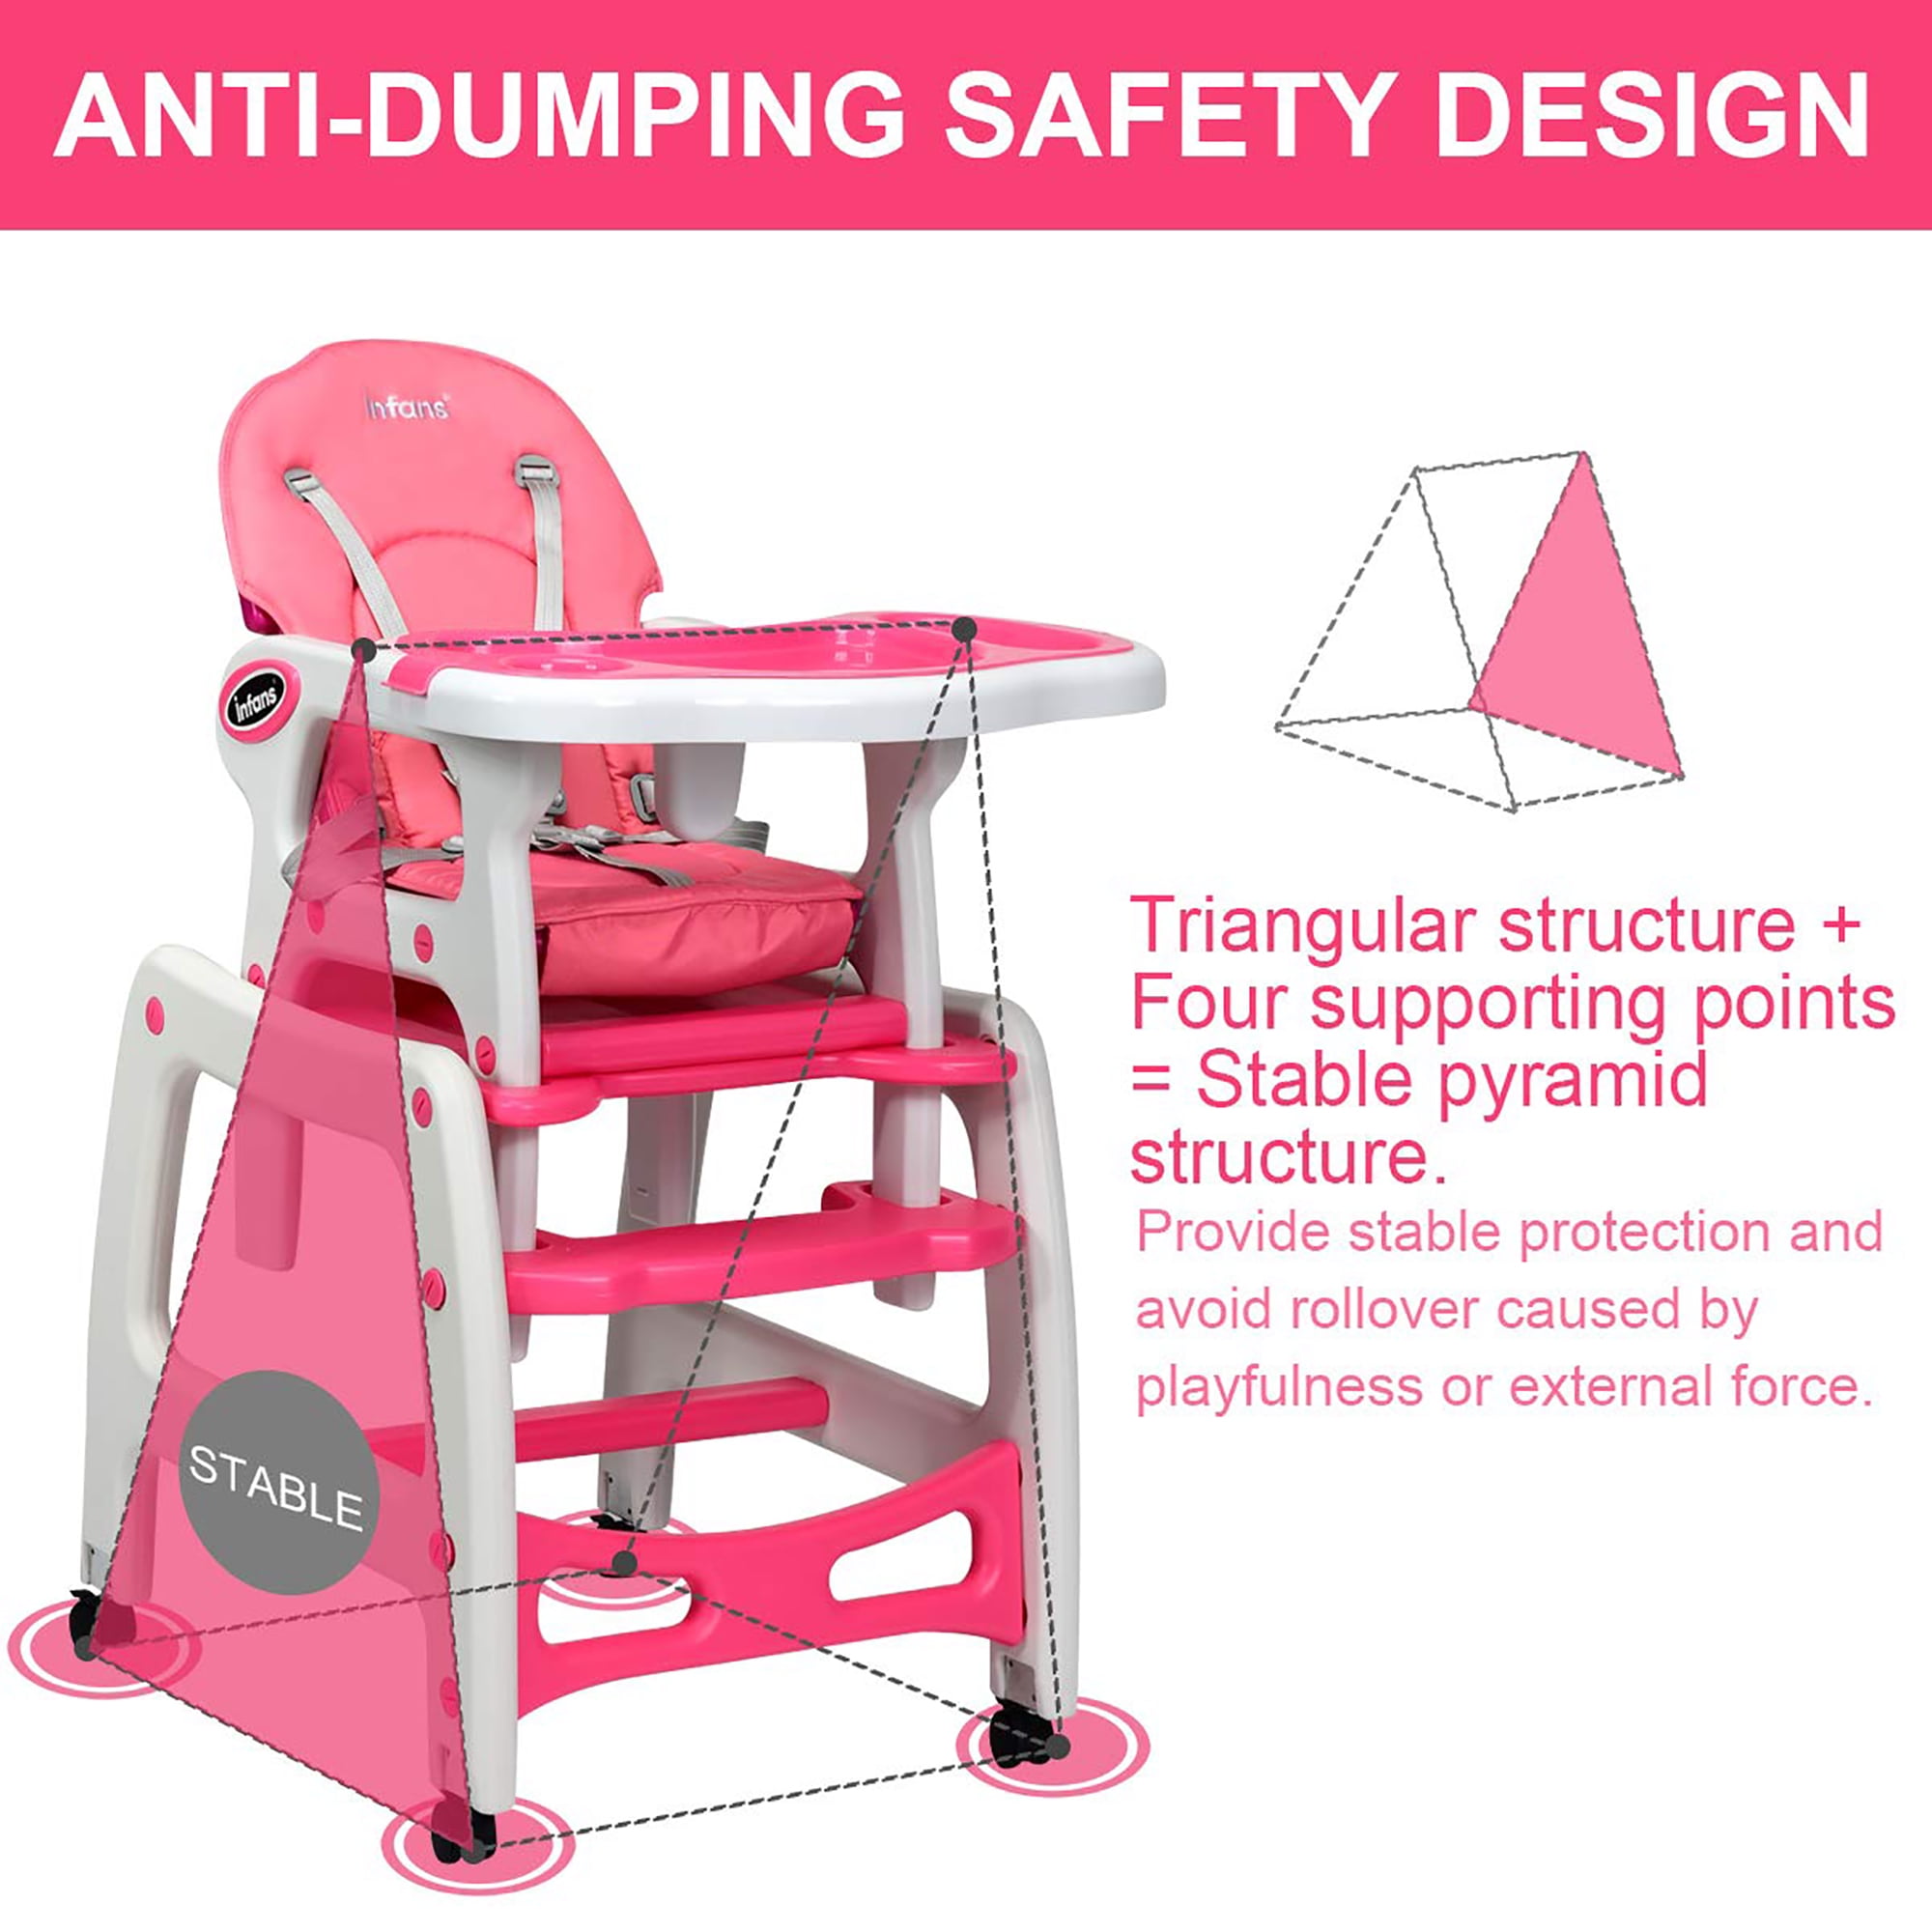 Generic High Multi-Function Portable Baby Chair Pink @ Best Price